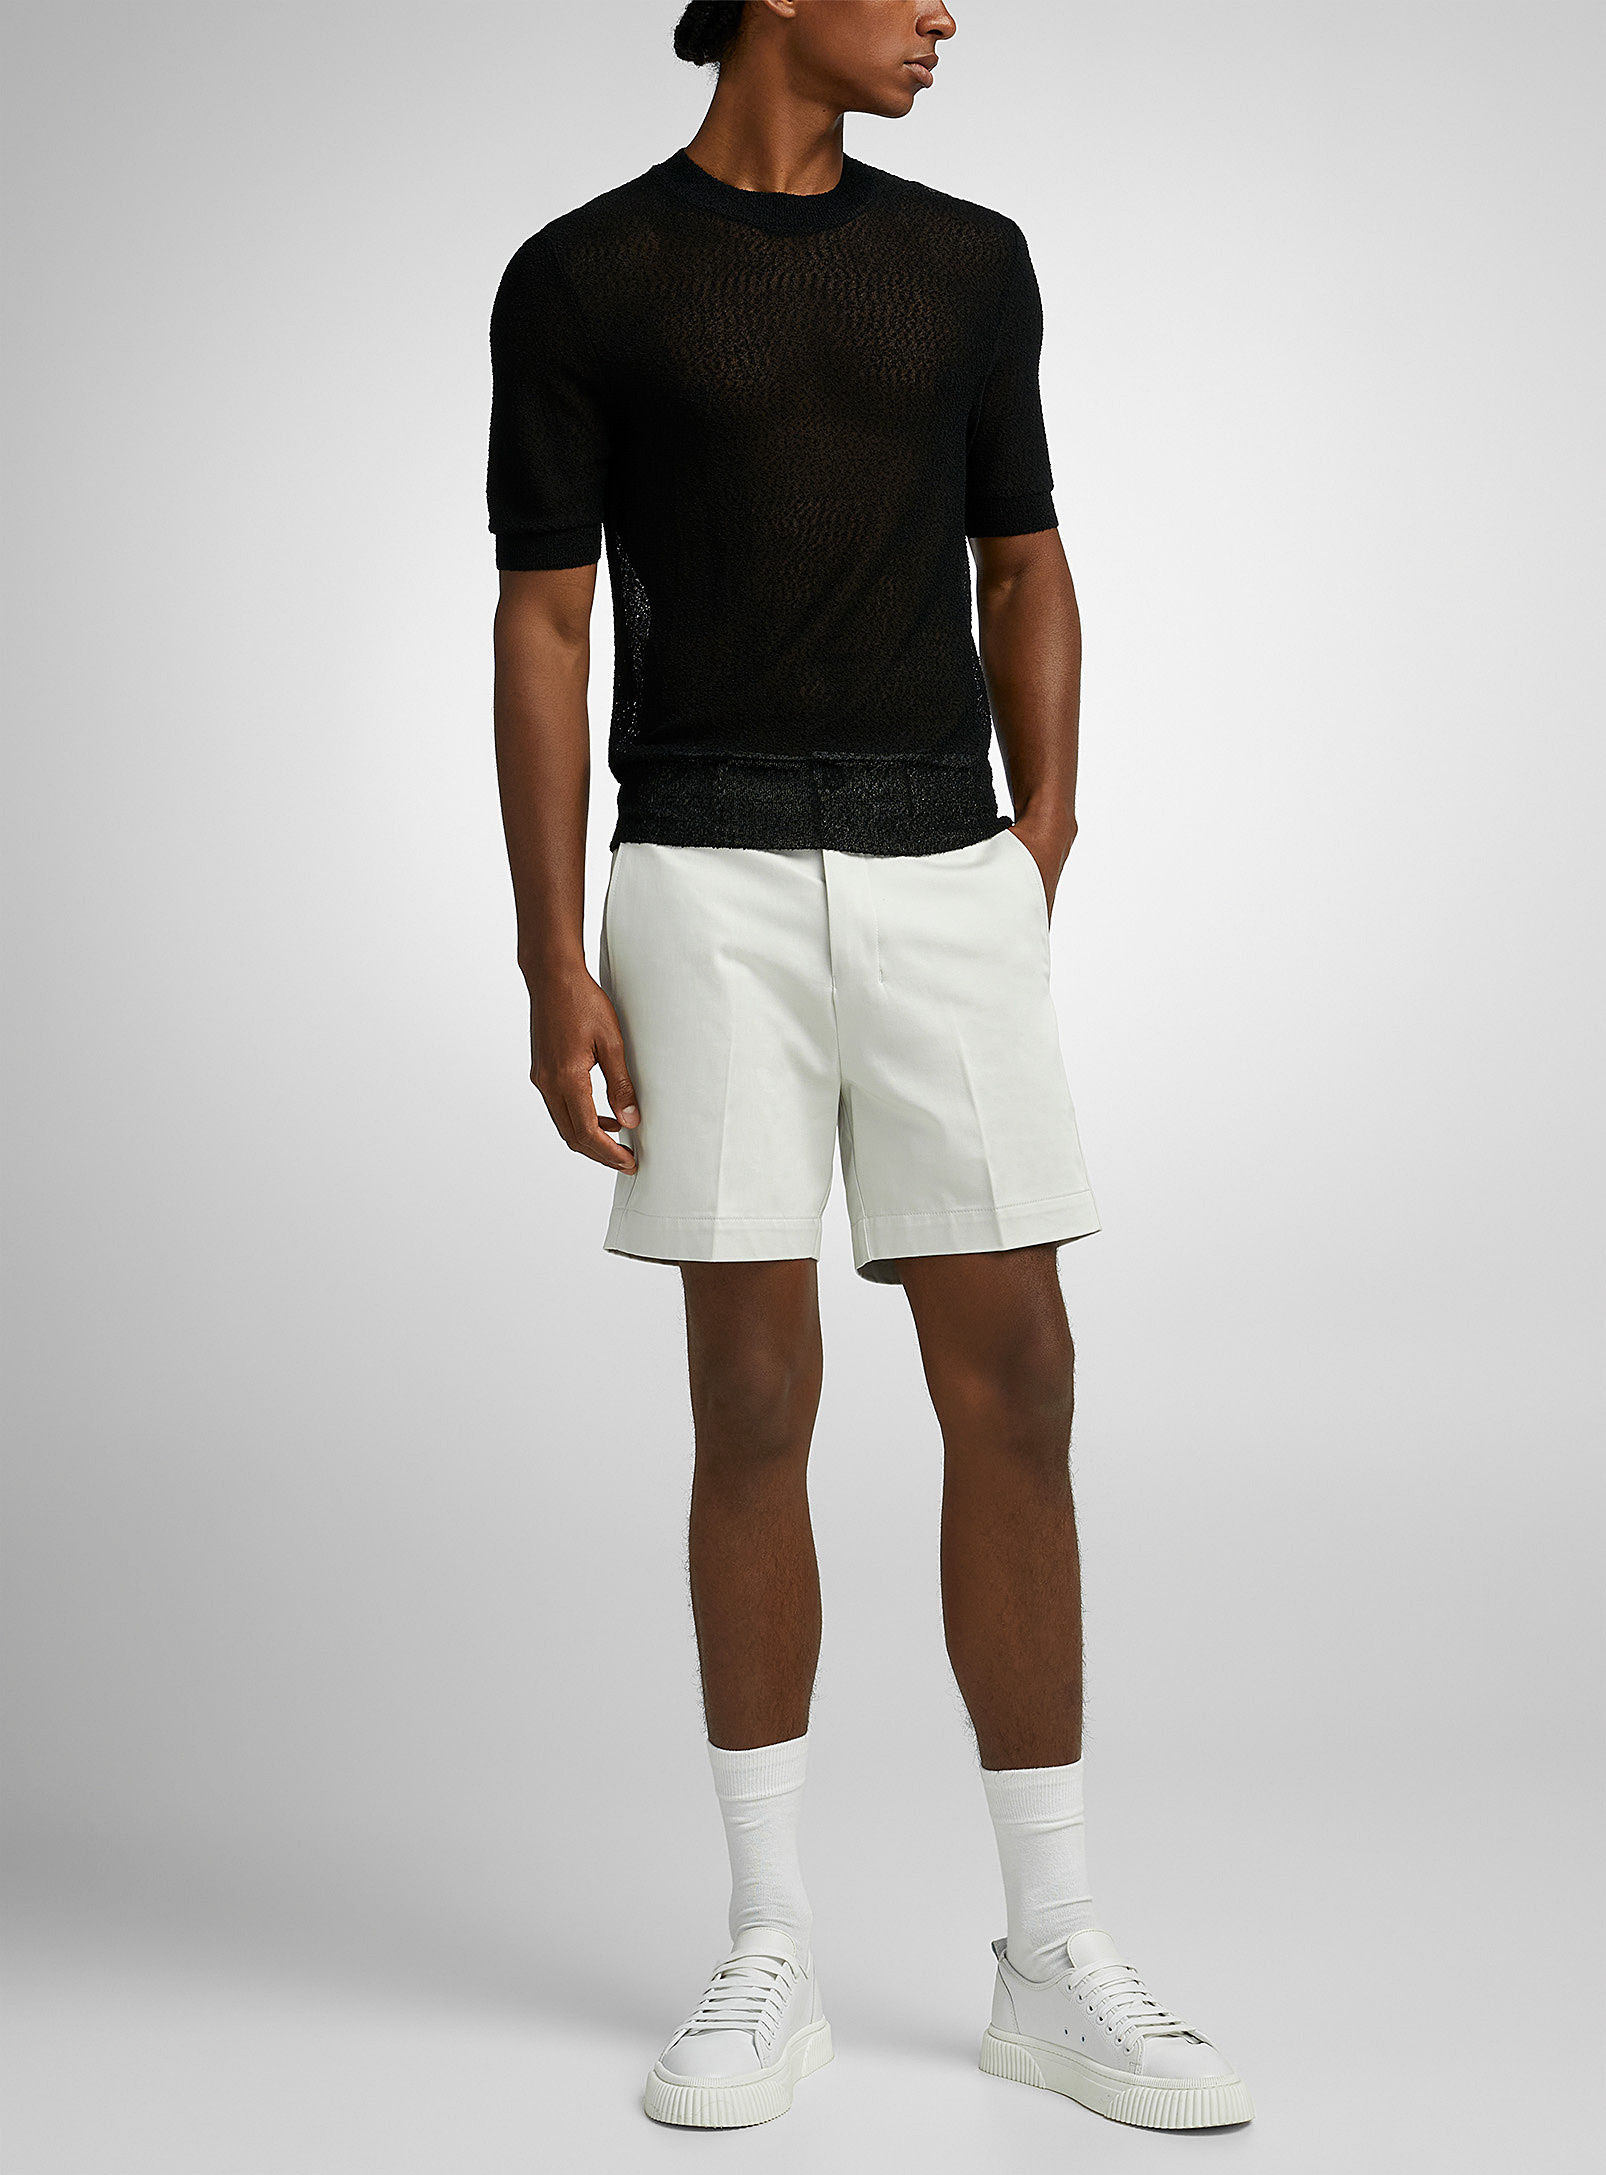 Ami - Men's Structured chino shorts